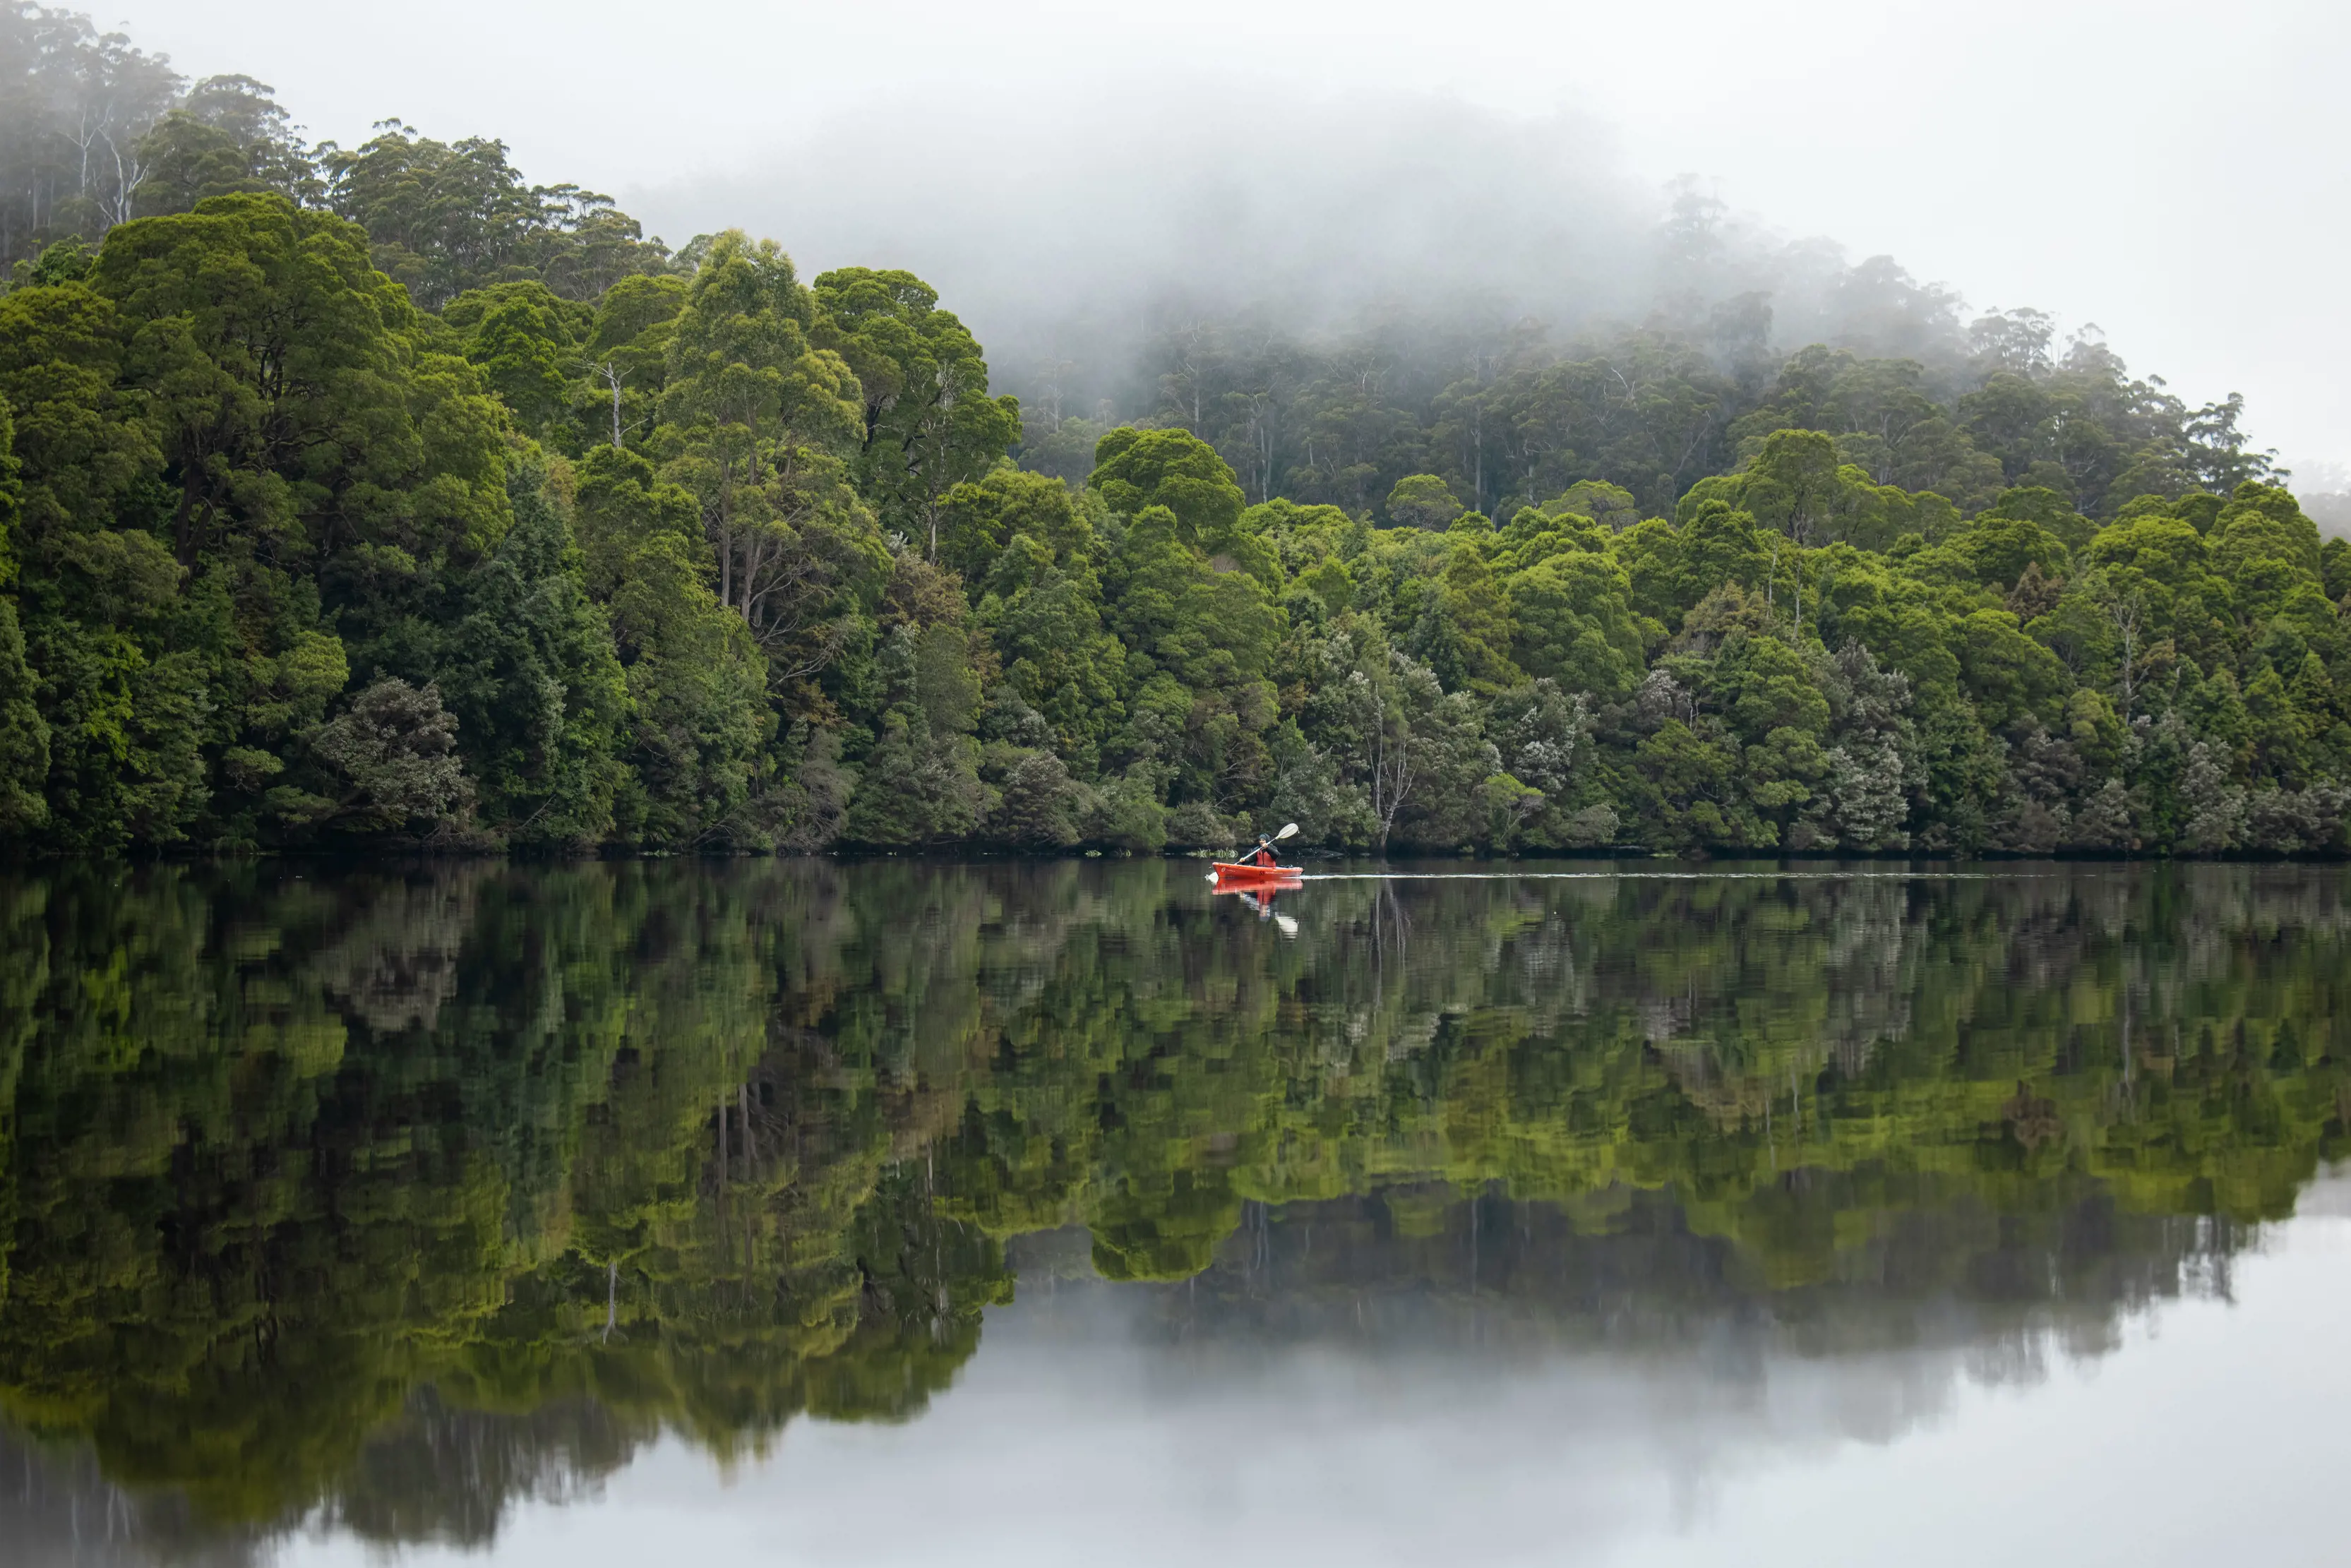 A person kayaks on the Pieman River.